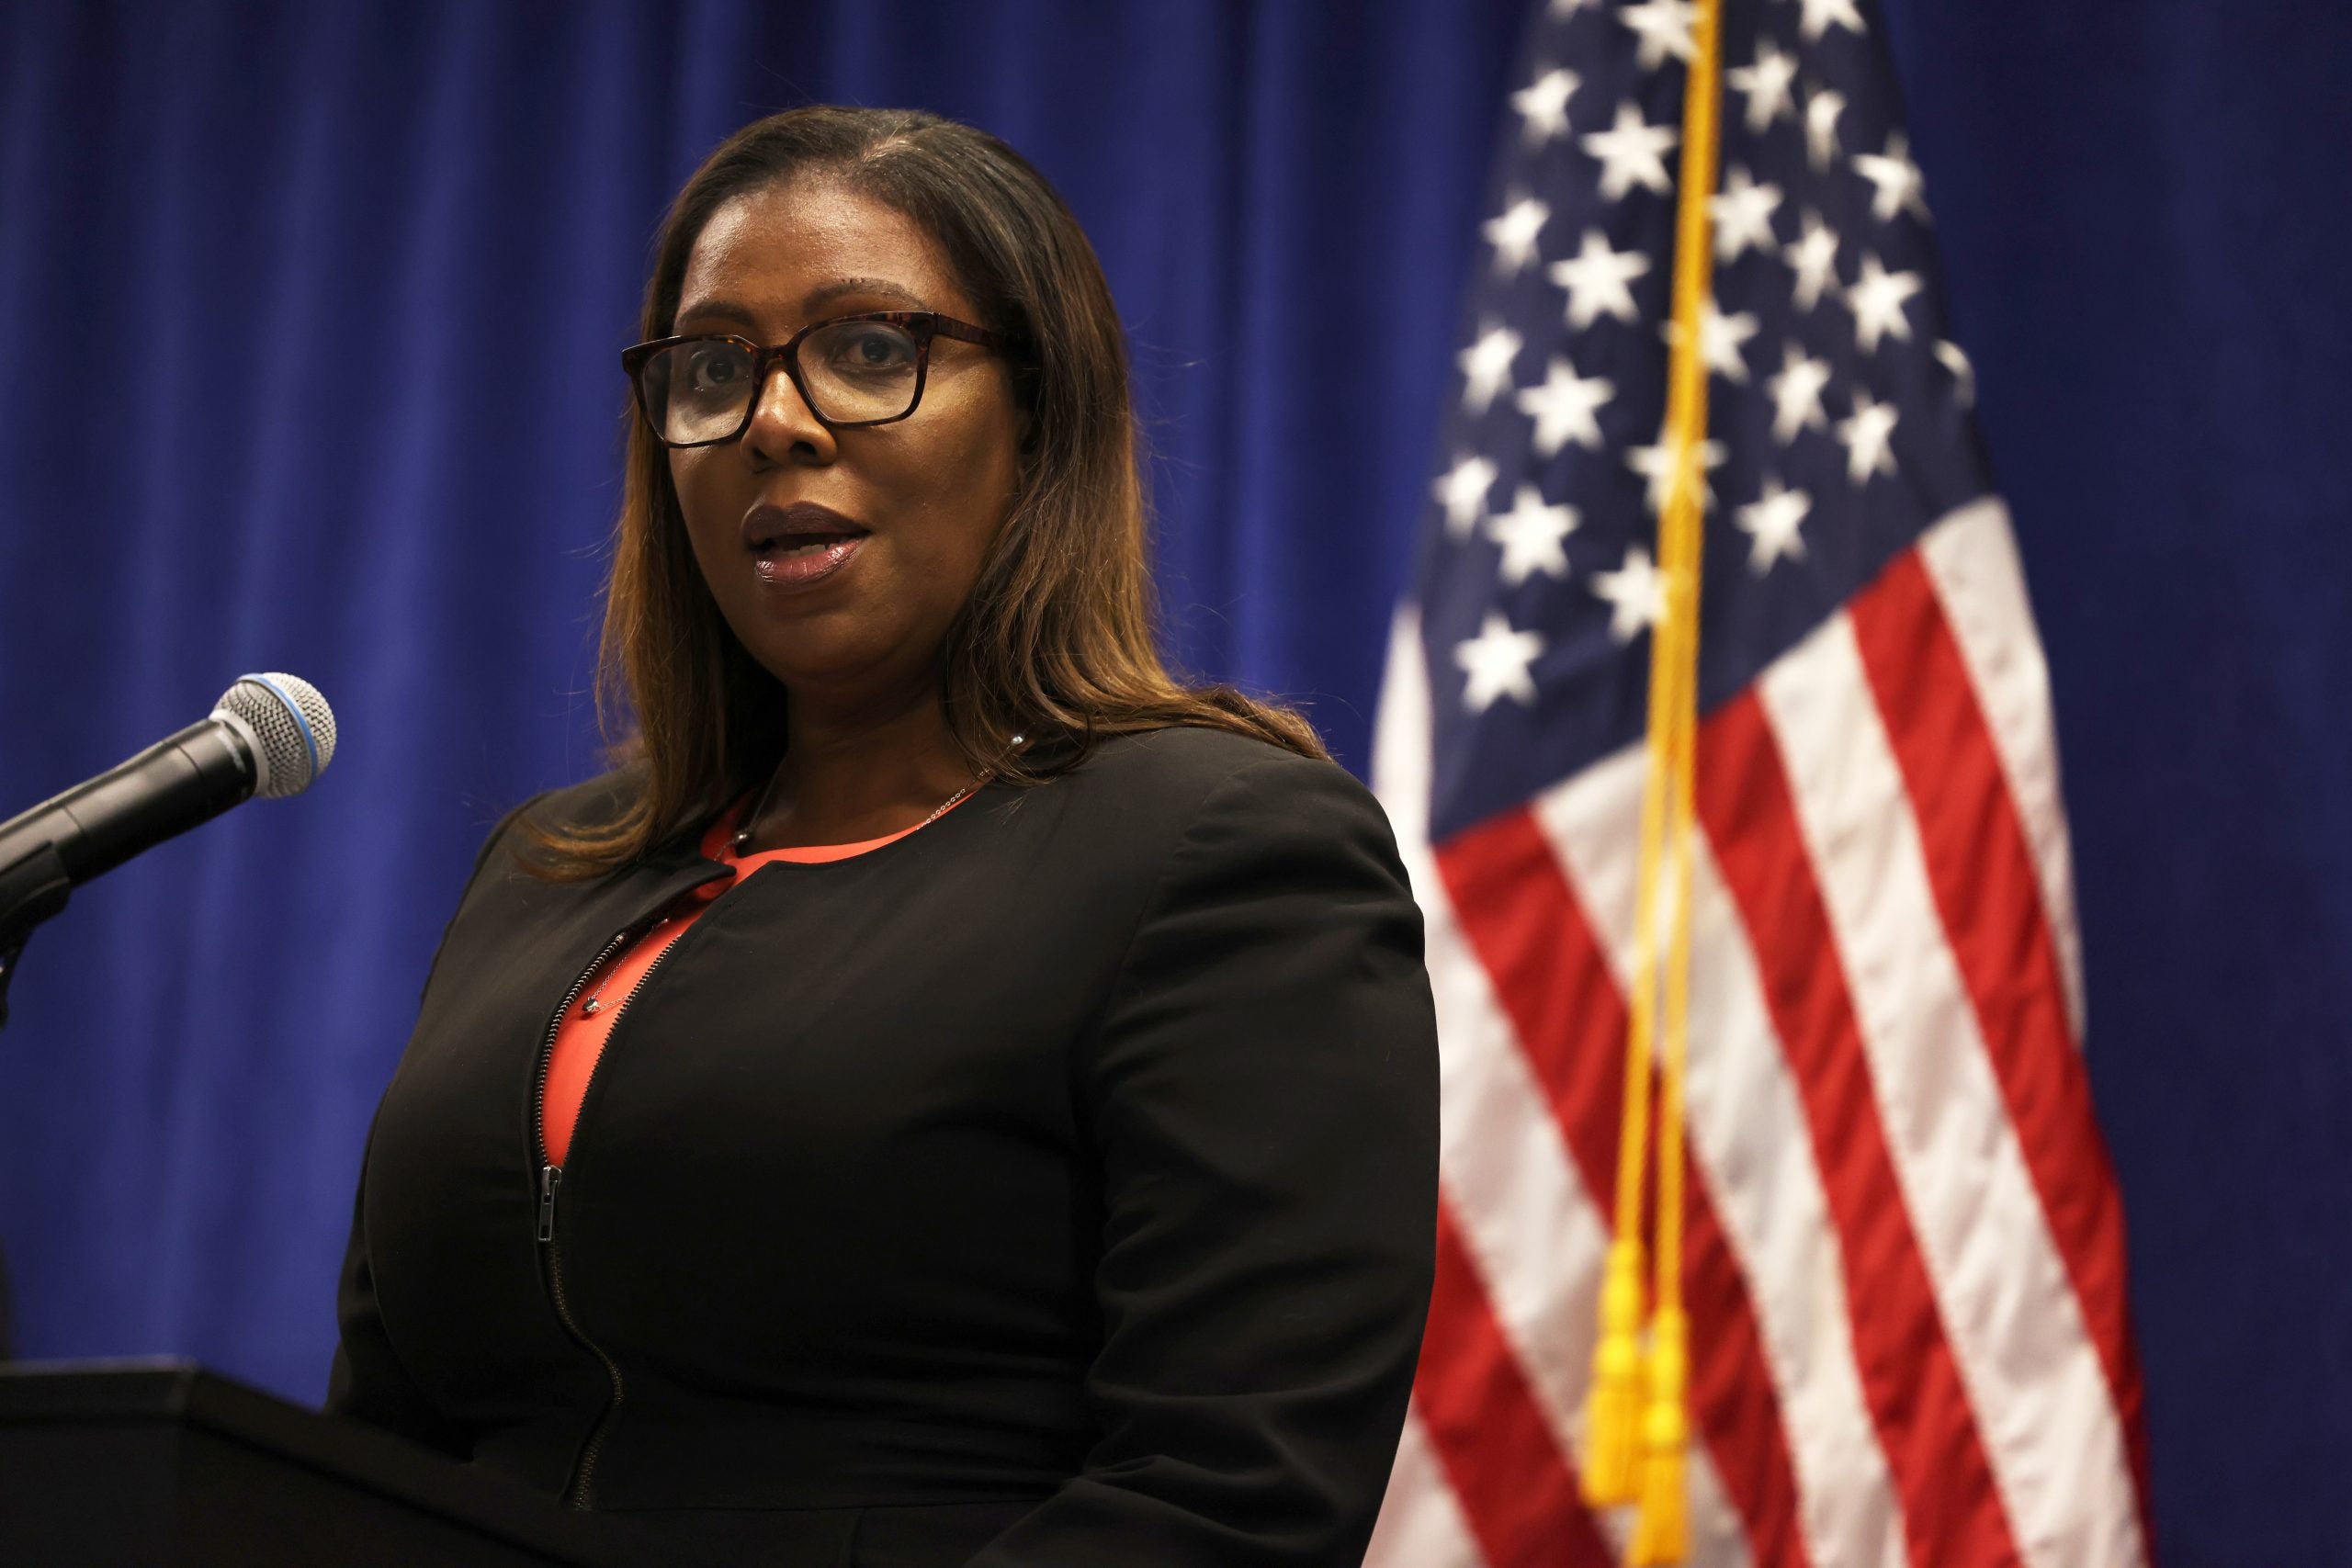 New York AG Letitia James Says The Investigations Into Trump Will Continue